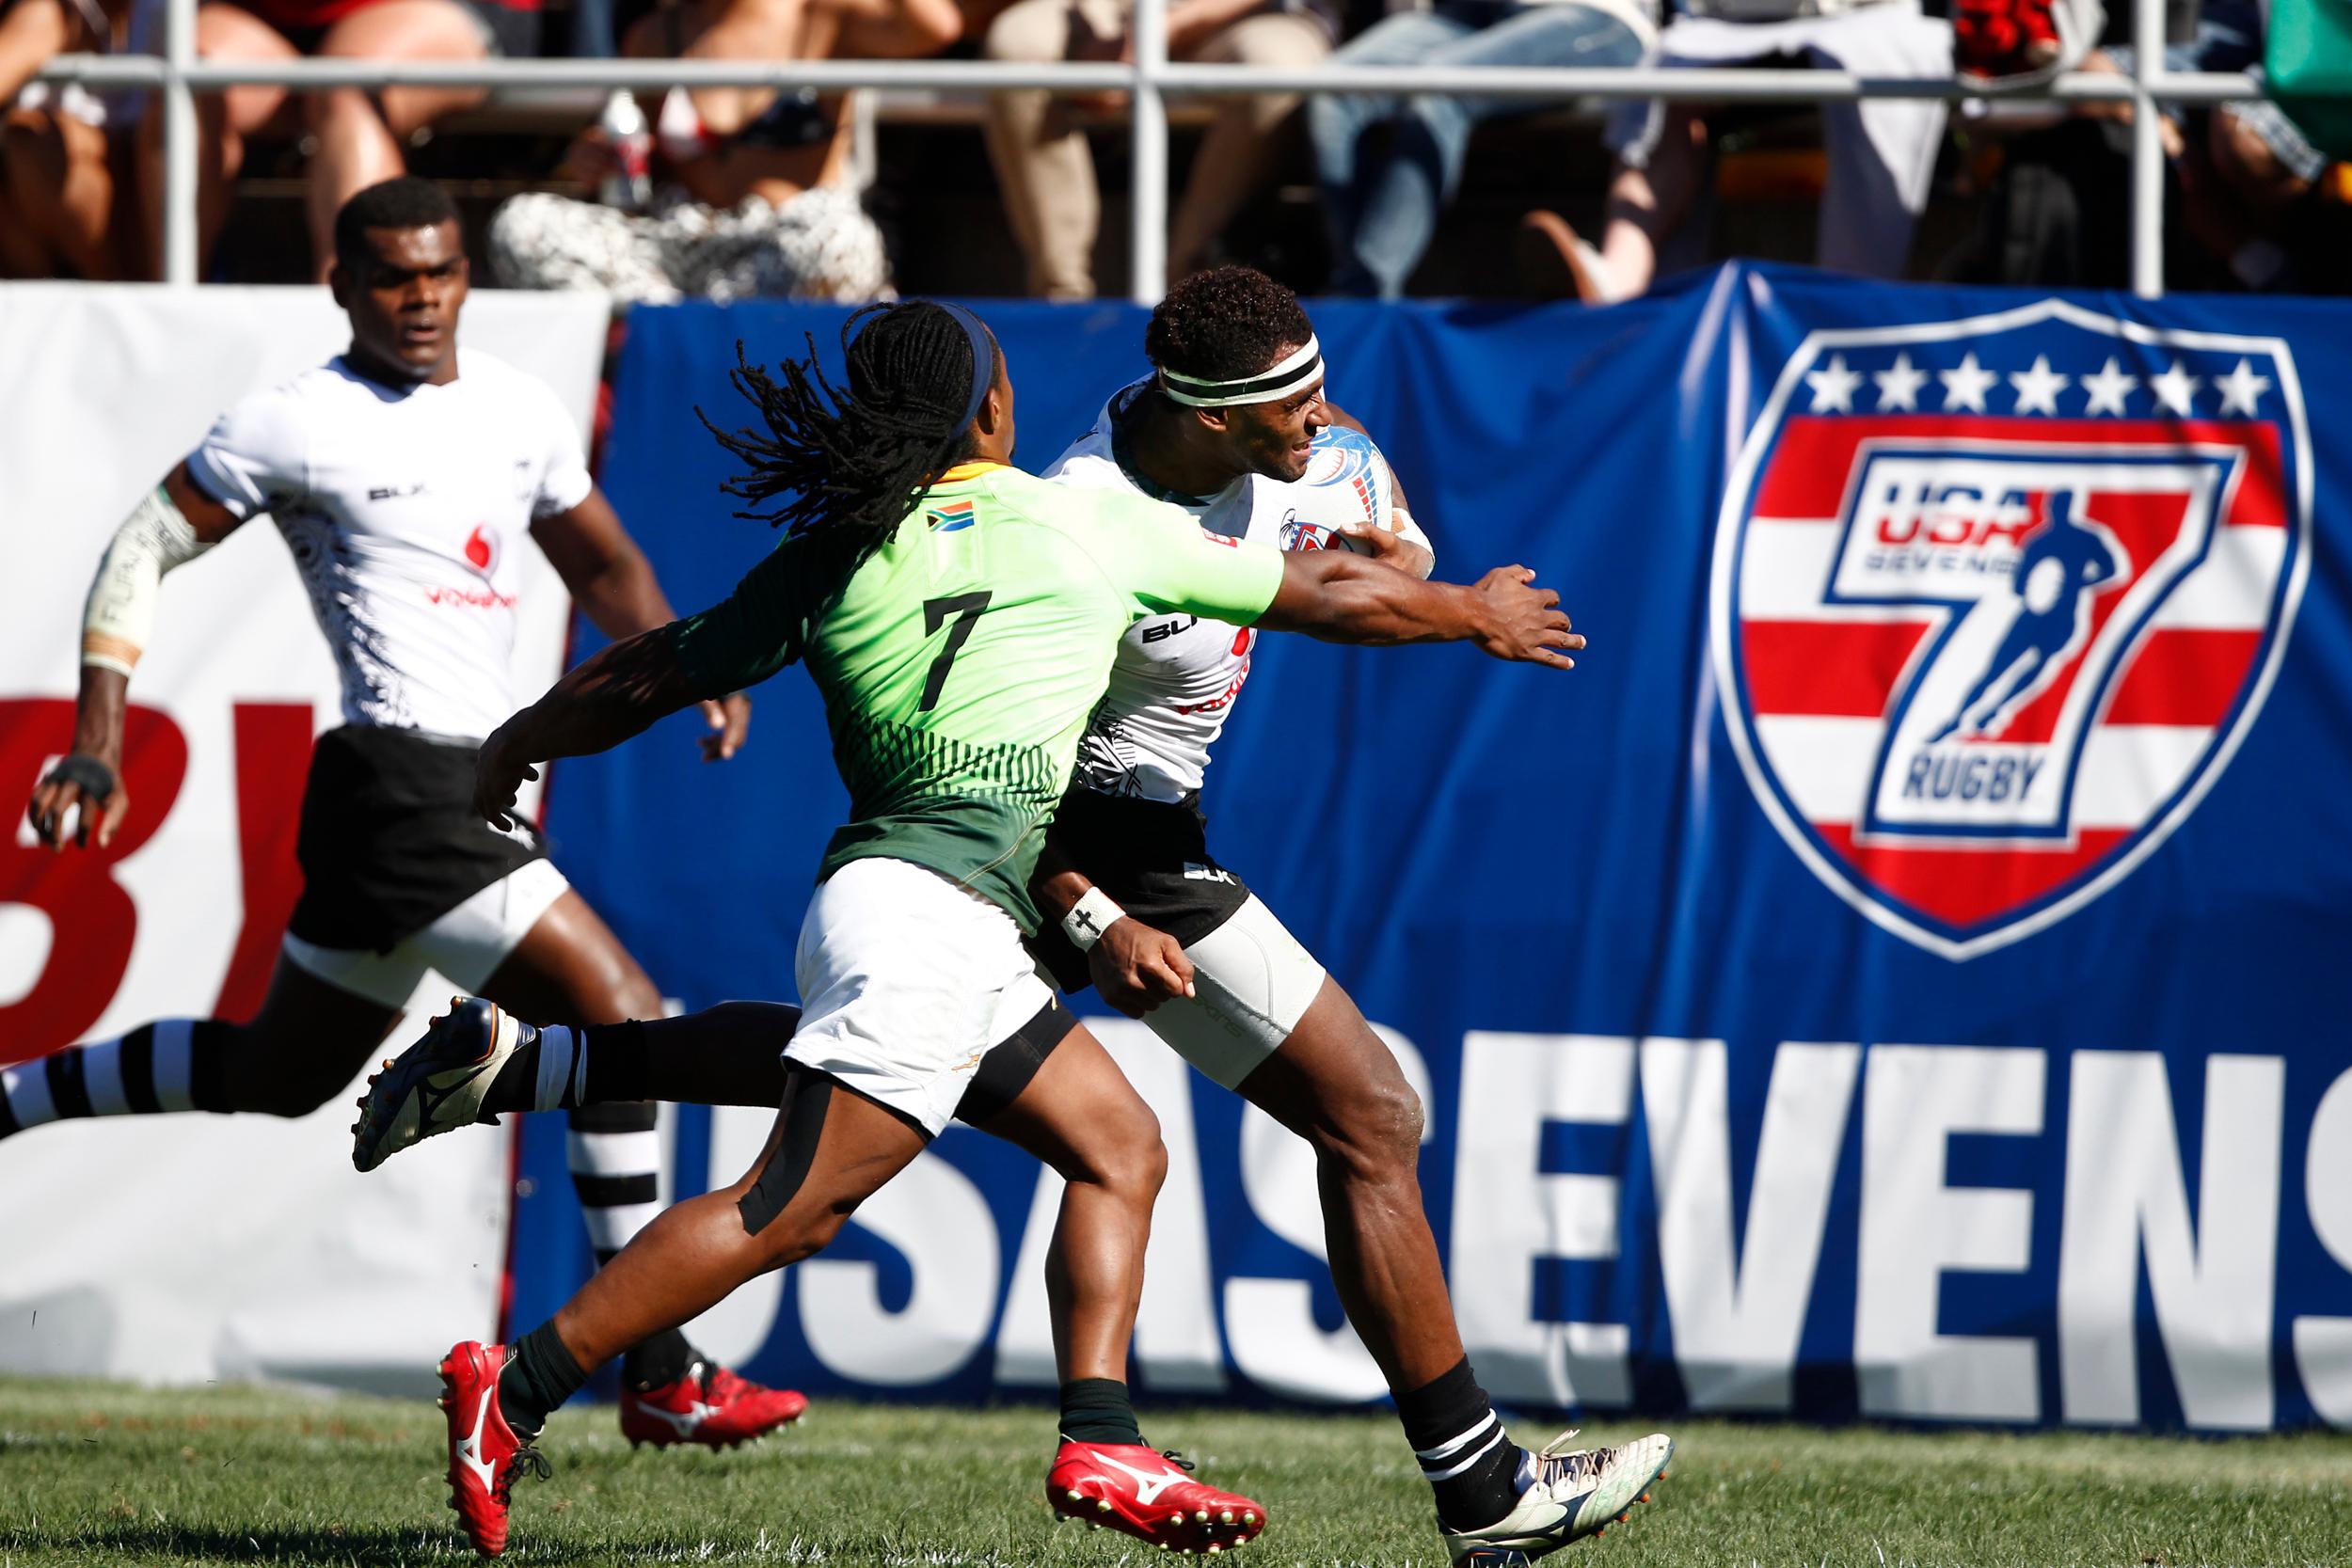 Fiji overcame series leaders South Africa in the semi-finals of the HSBC Sevens World Series in Las Vegas on their way to winning the tournament ©World Rugby